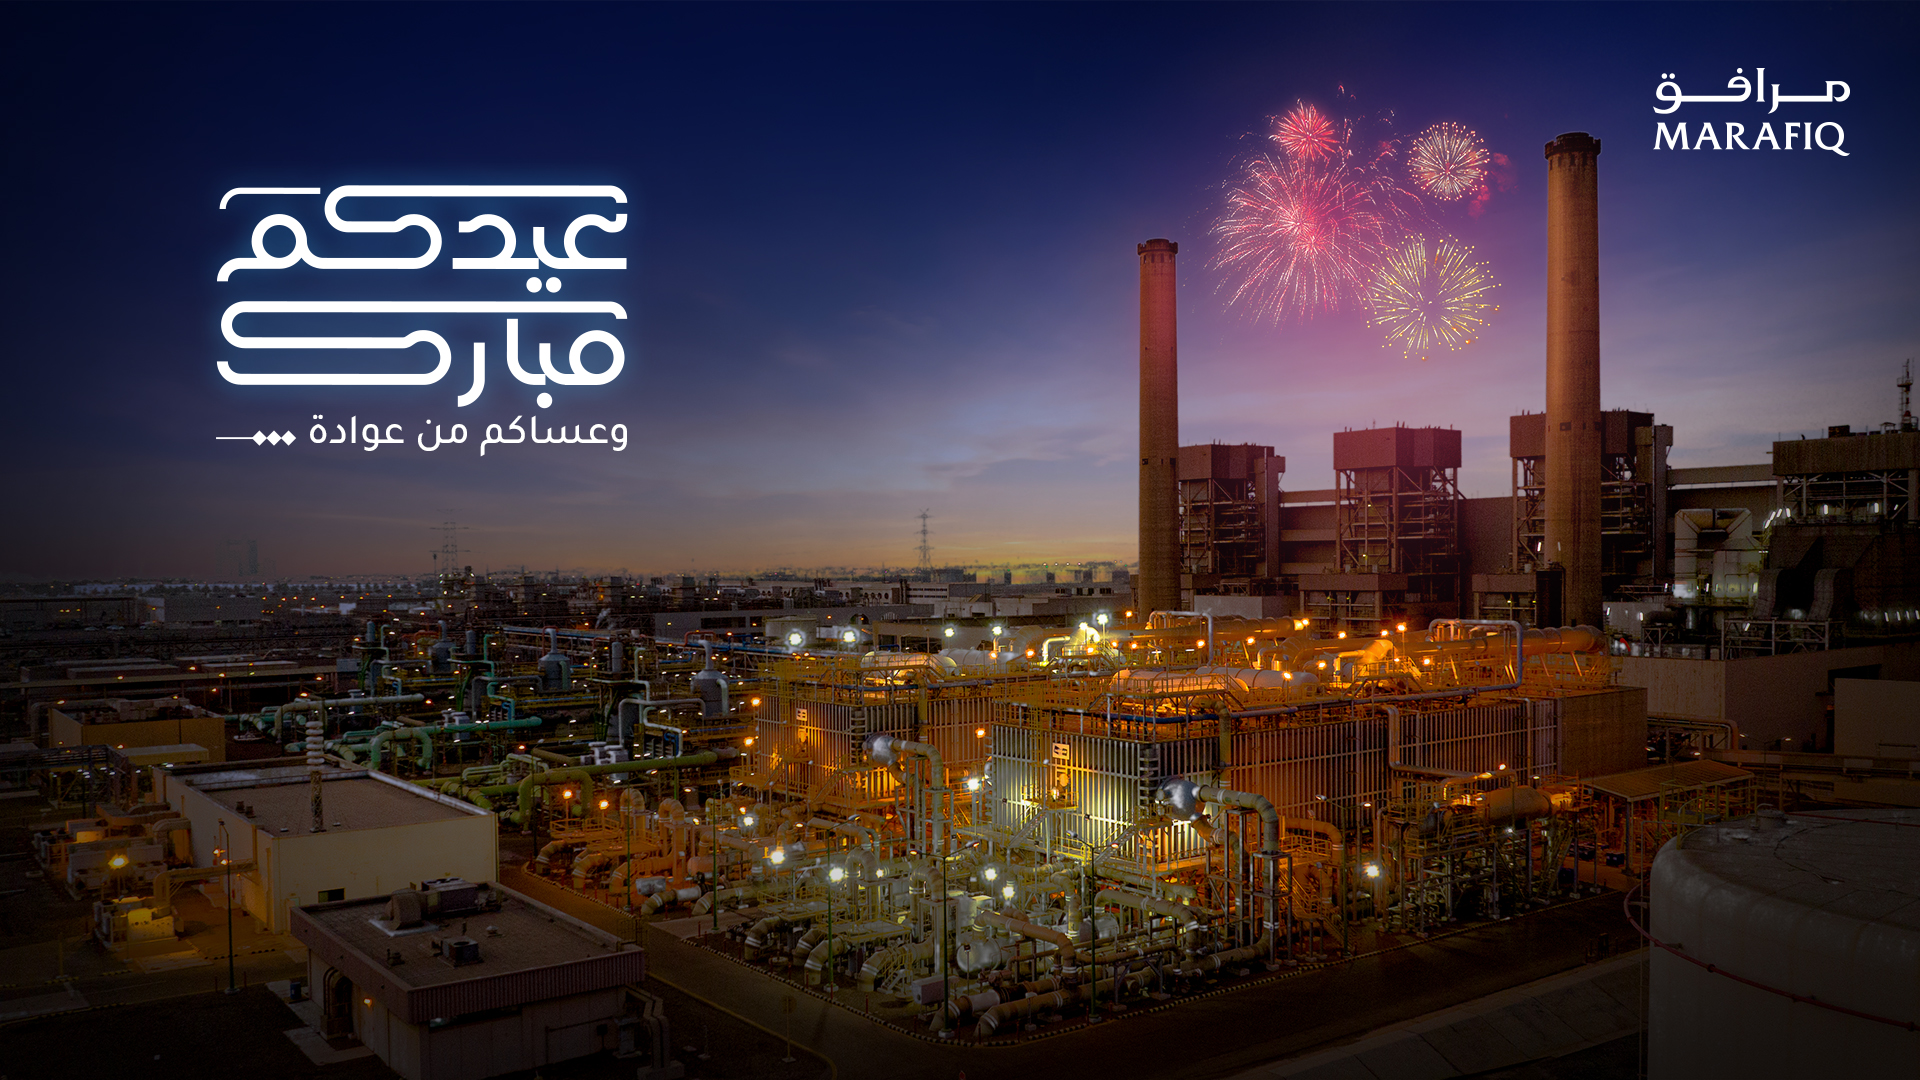 Eid greeting for Marafiq with factory and fireworks